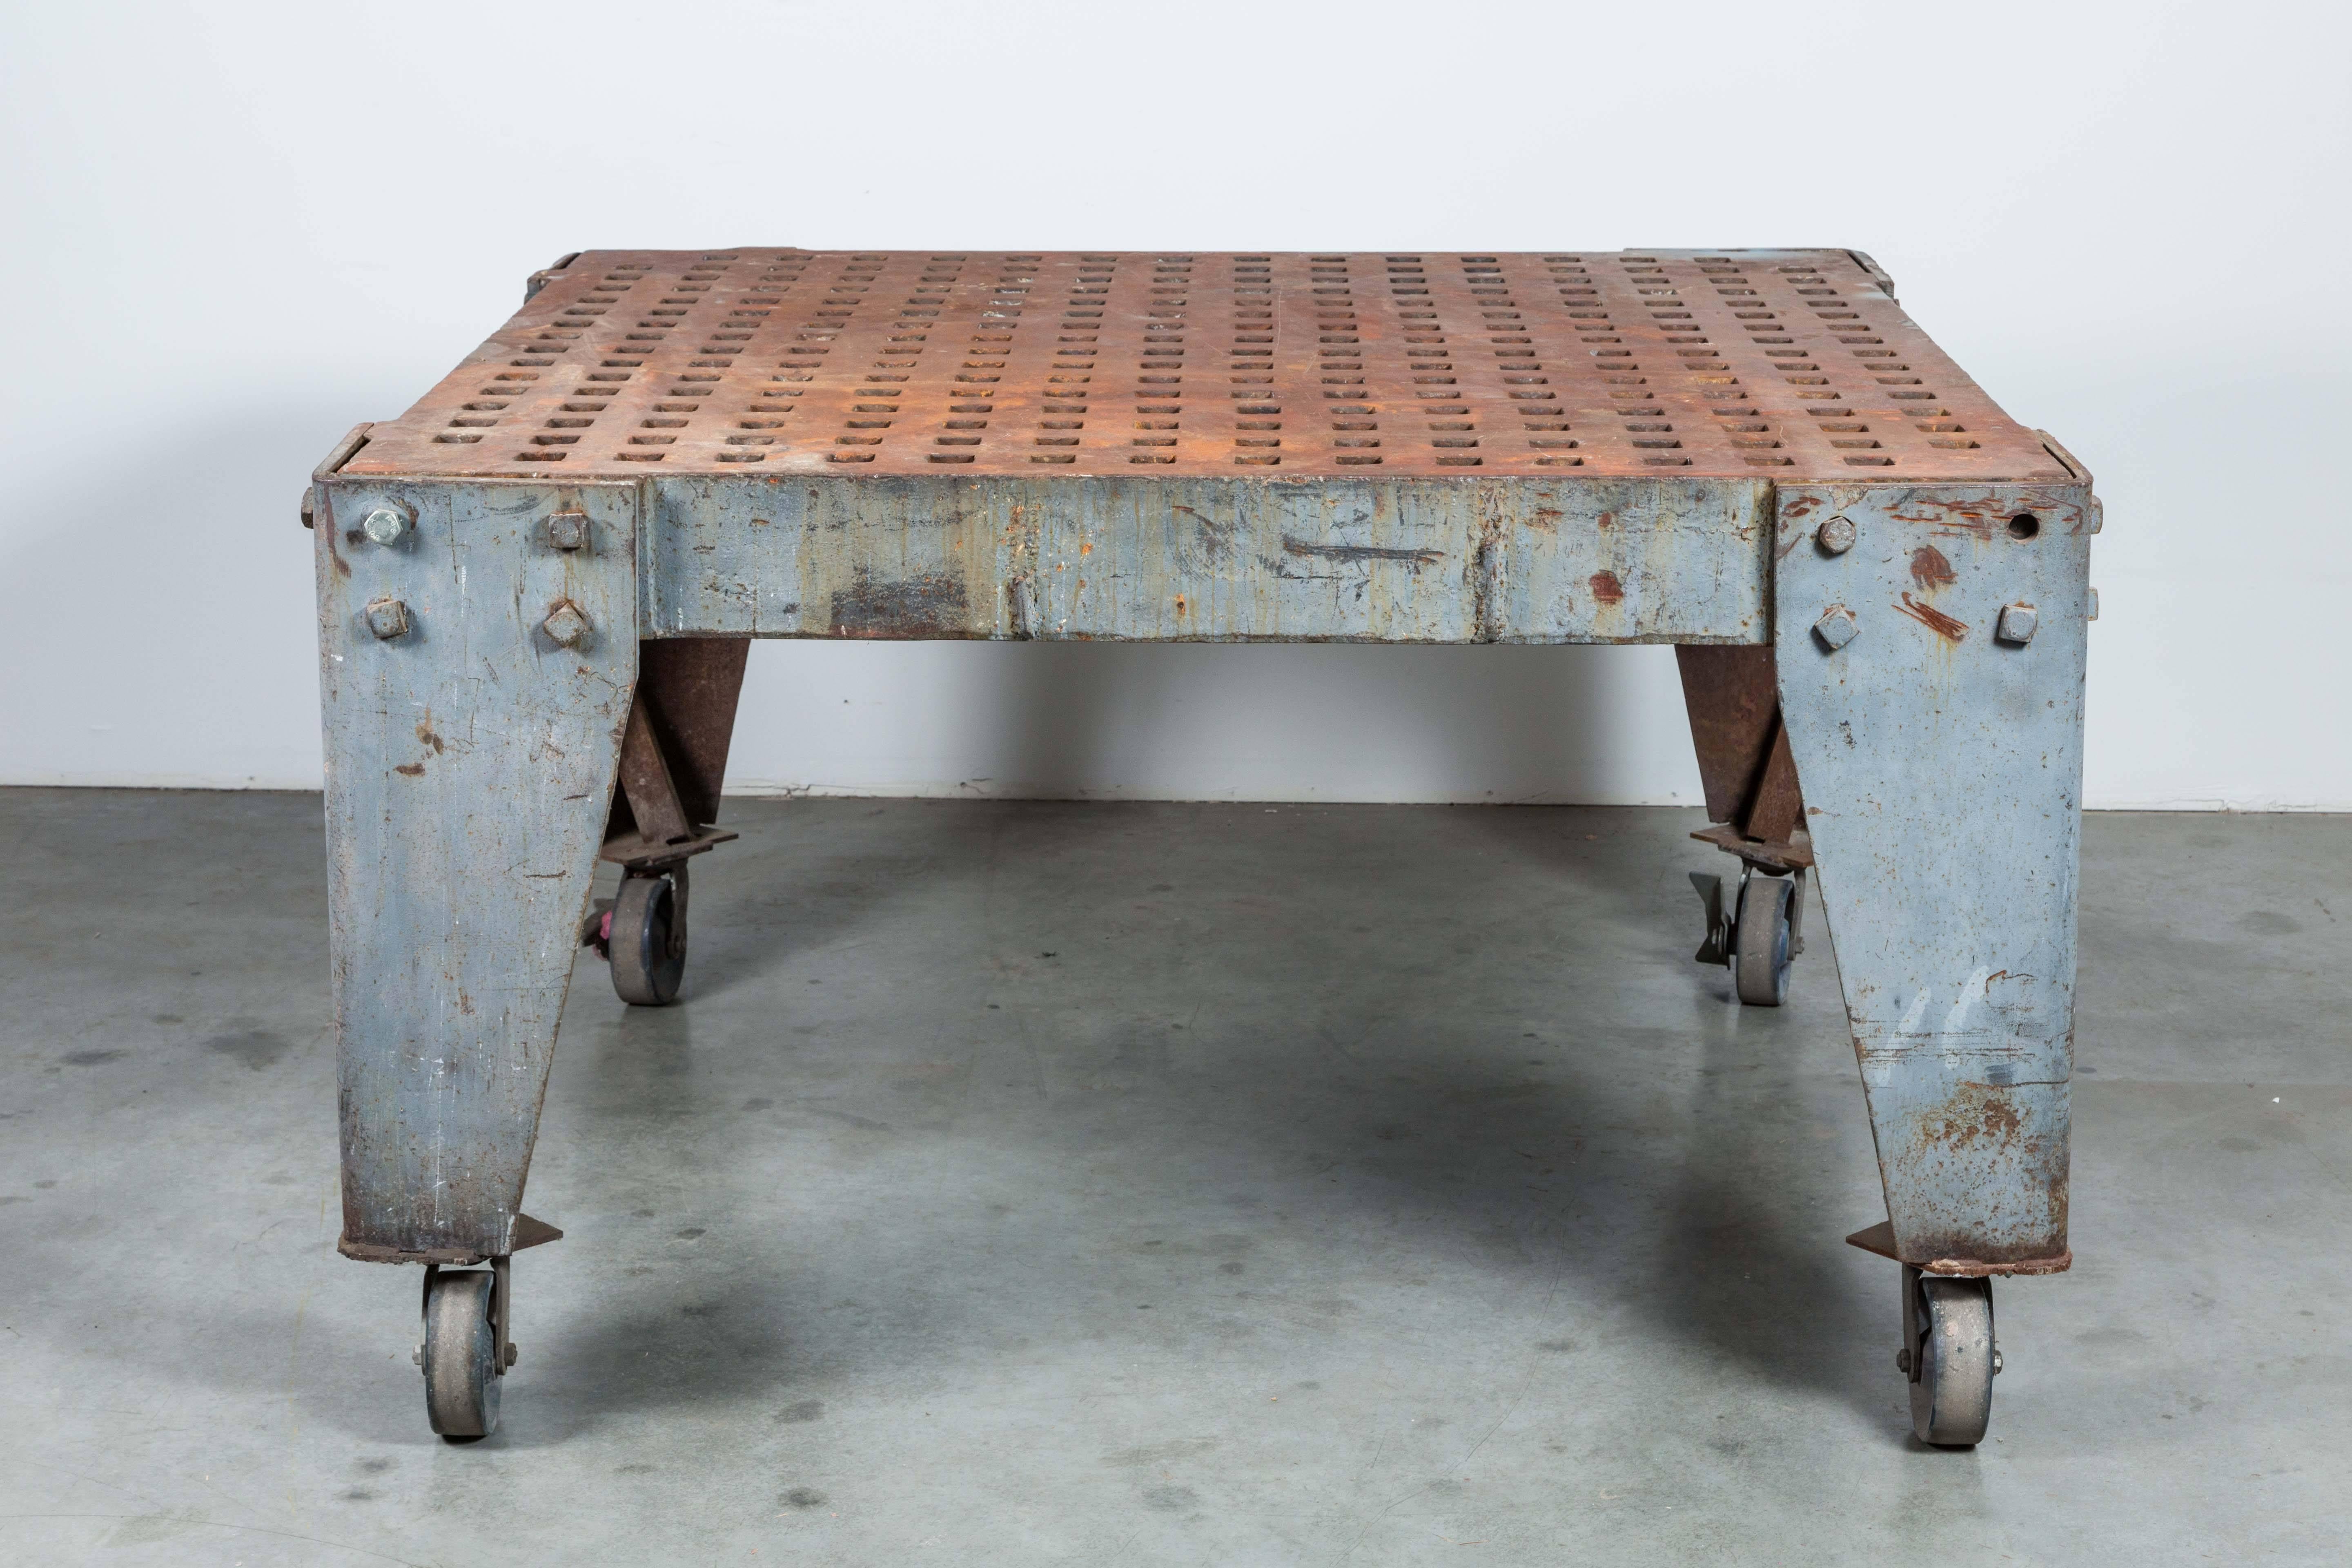 Amazing retail display or loft dining table made of solid cast iron. Originally a welder's table and work surface. On casters which could be removed to lower table height. Would make a great kitchen island as well. Please note that this table weighs